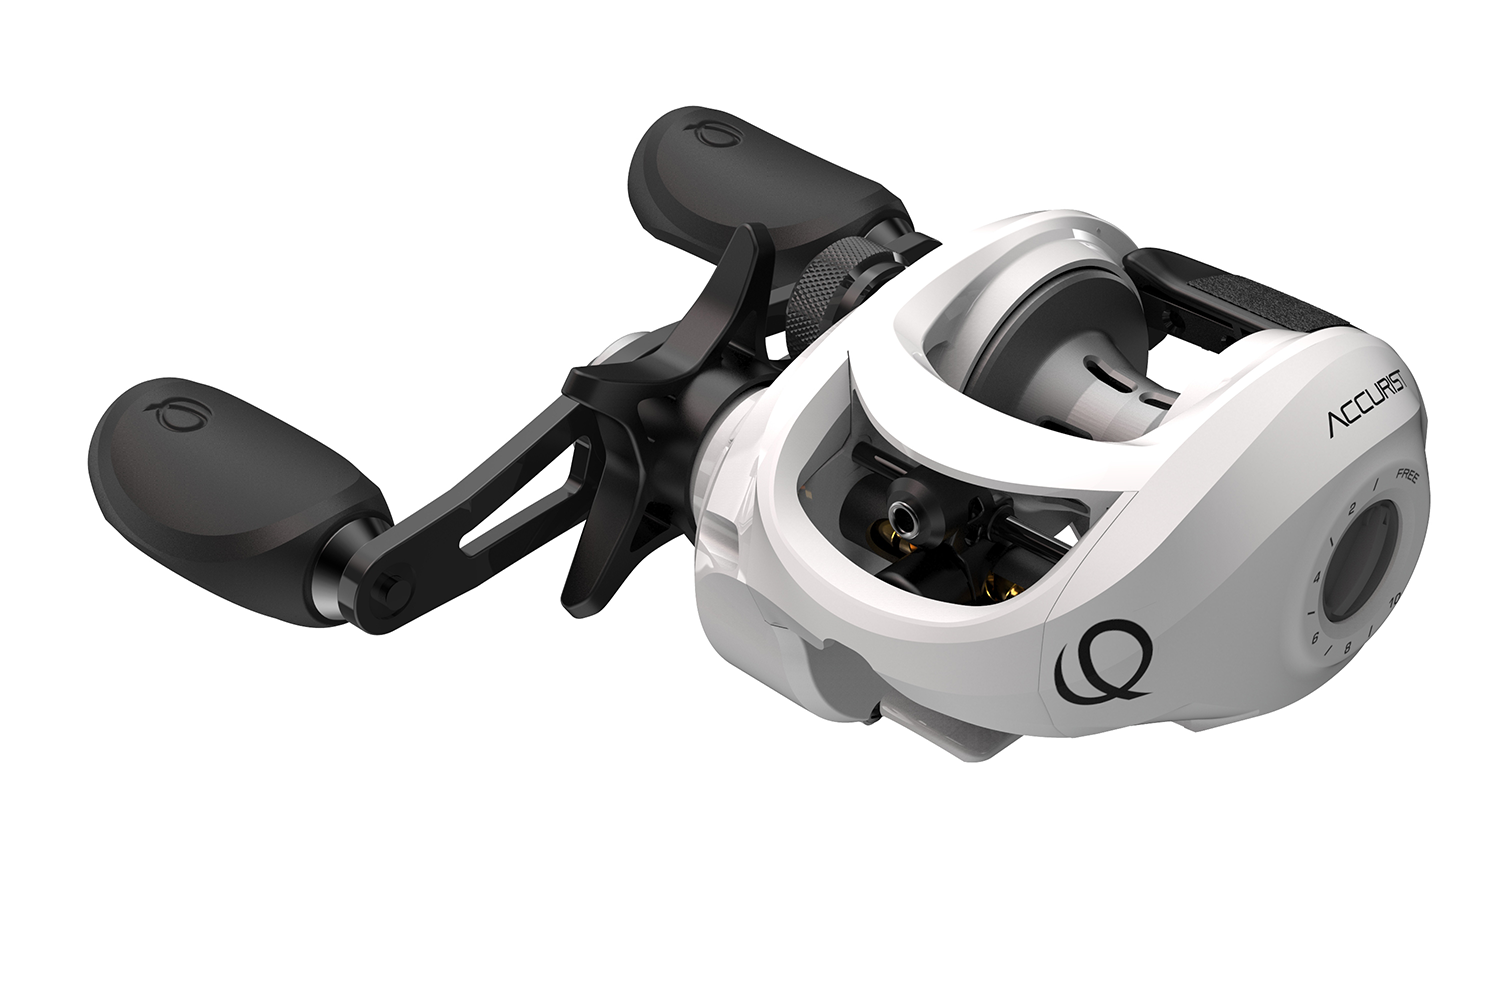 <p><b>Accurist Reel </b></p>
<p>Take charge of your fishing trips with this dependable Quantum Accurist baitcast reel. Constructed with a ceramic-carbon drag system, 8+1 PT speed bearings, ACS cast control and a zero-friction design, Accurist provides extreme smoothness and line fluidity with every cast. A sturdy one-piece aluminum frame equipped with a Flippin' Switch and sealed with SaltGuard Protection keeps this baitcast reel corrosion-free and ready to take on any fish, head-to-head. With a guaranteed 5-year warranty, this reel is a foolproof option for every angler.</p>
<p><a href=